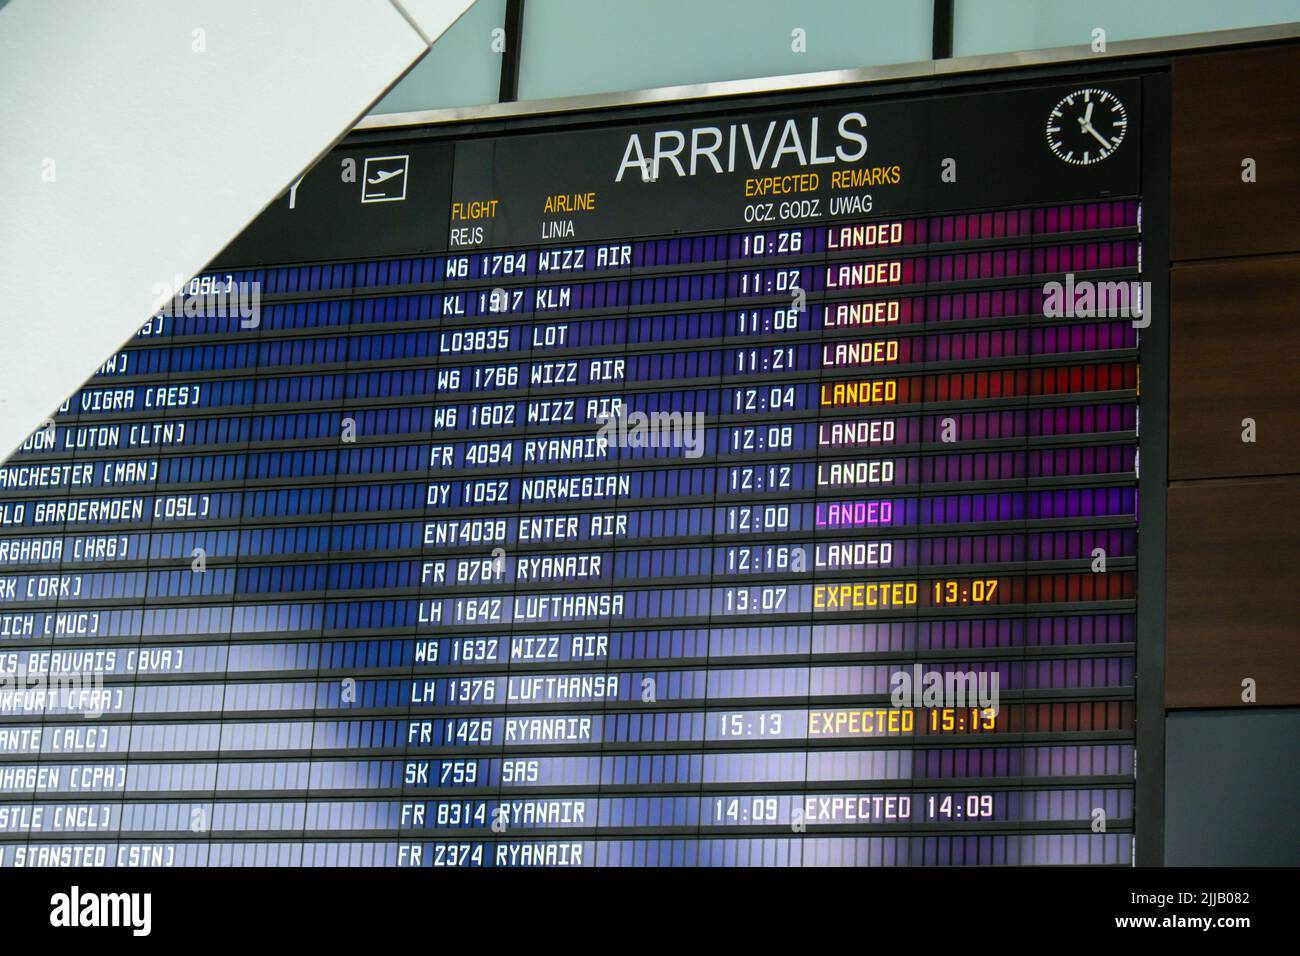 Gdansk Poland - May 2022. Flight information board, checking flights. Tourists at international airport terminal flight timetable. Travel concept Airport Tab showing flights being delayed and canceled  Stock Photo